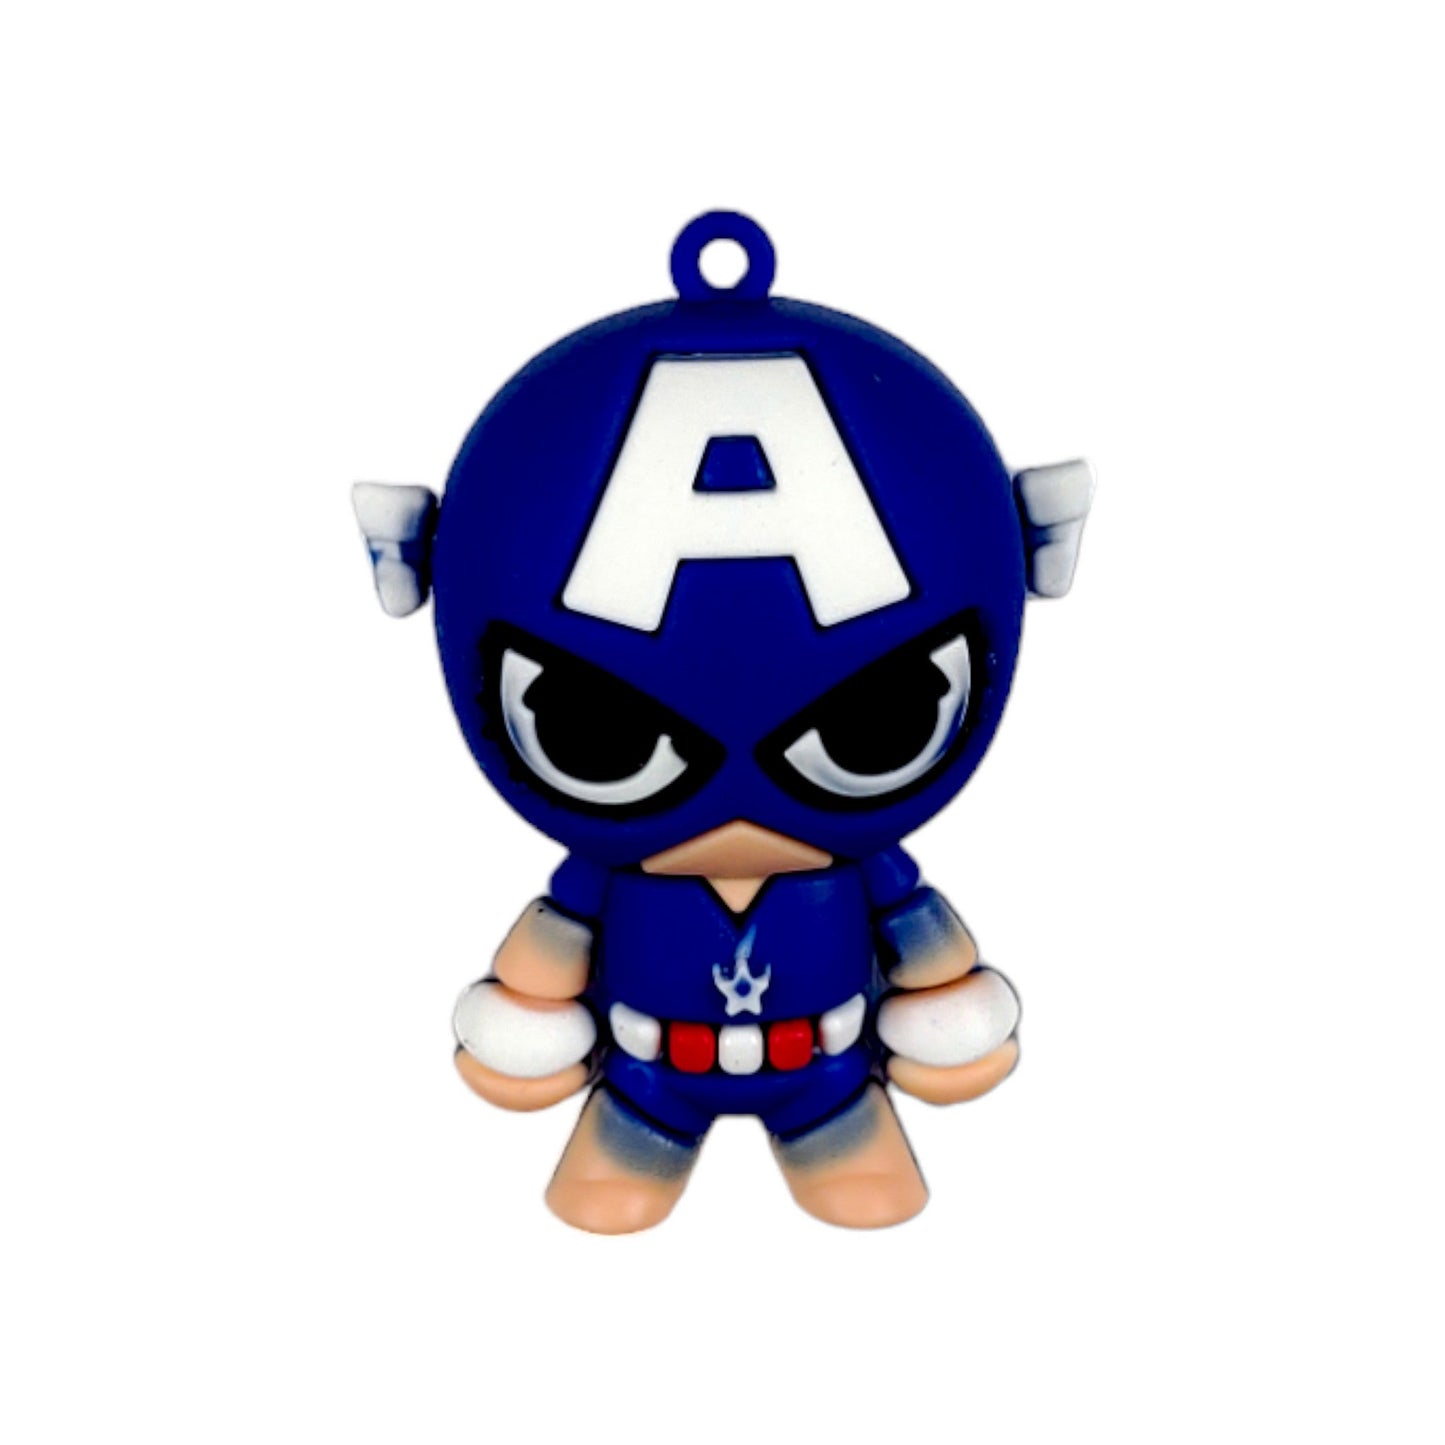 Silicon-Resin Avengers Doll Motif for Craft or Decoration or Key-Chains, 25Pcs